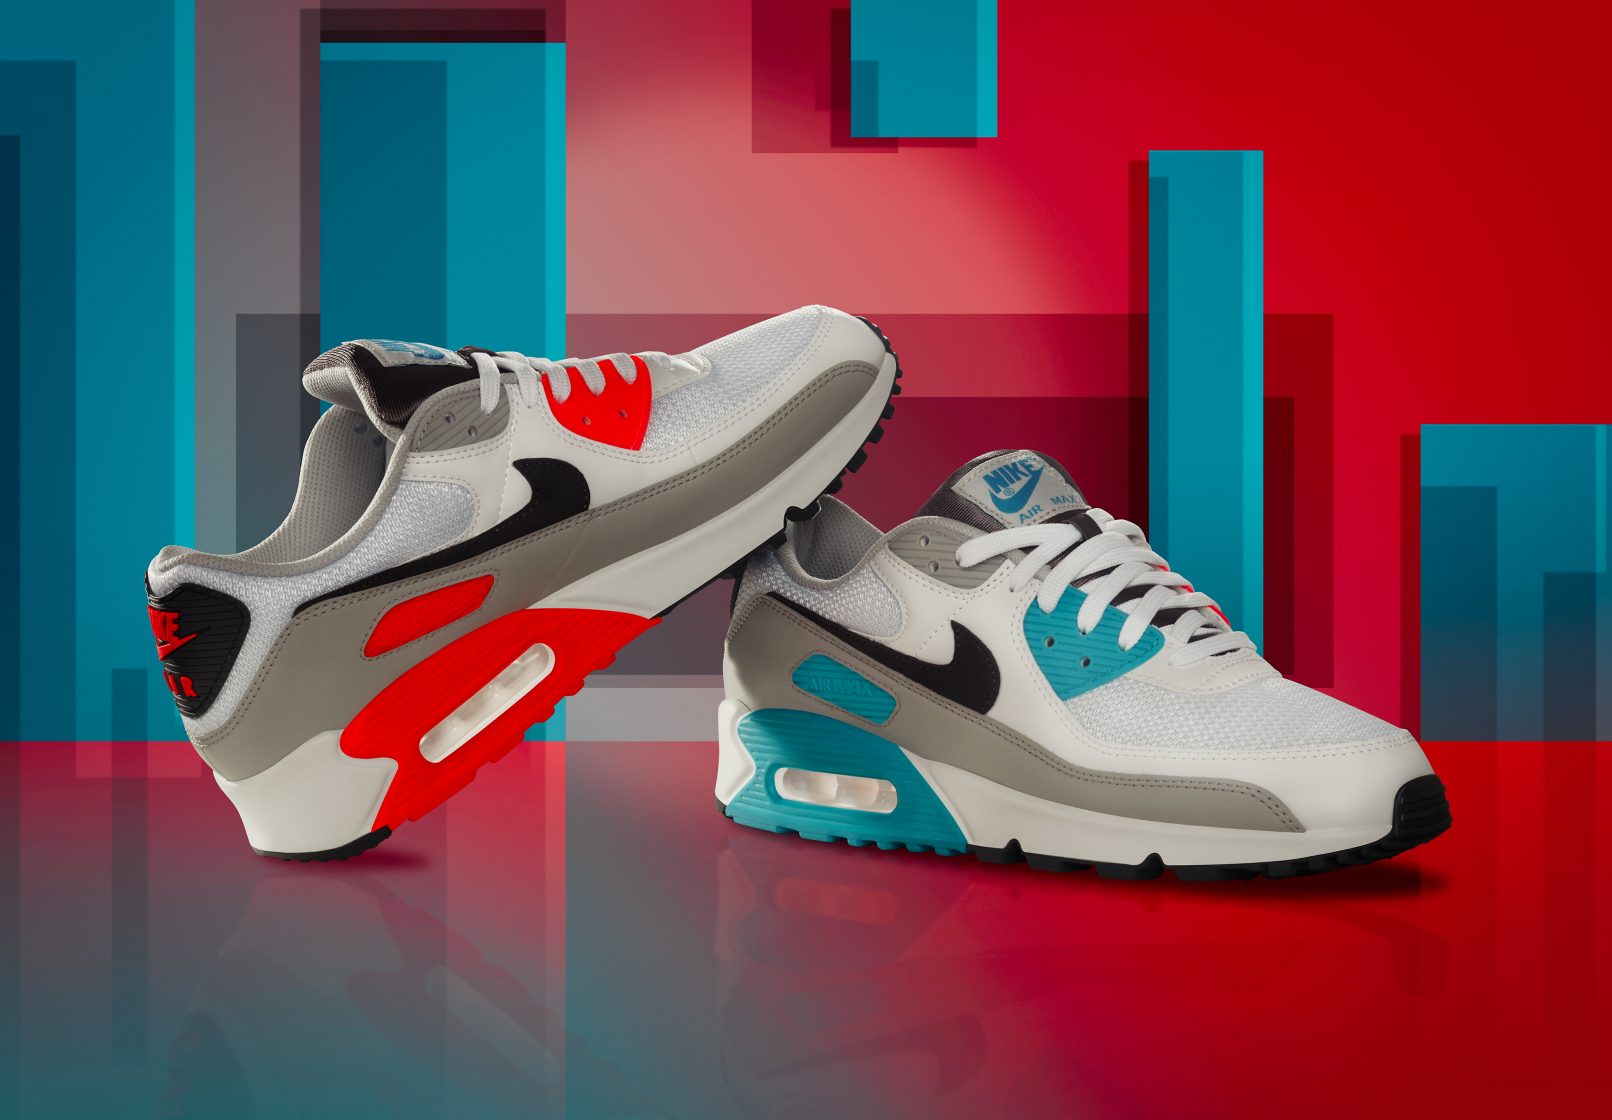 Nike Air Max Two Colors Maikel Thijssen Photography Final